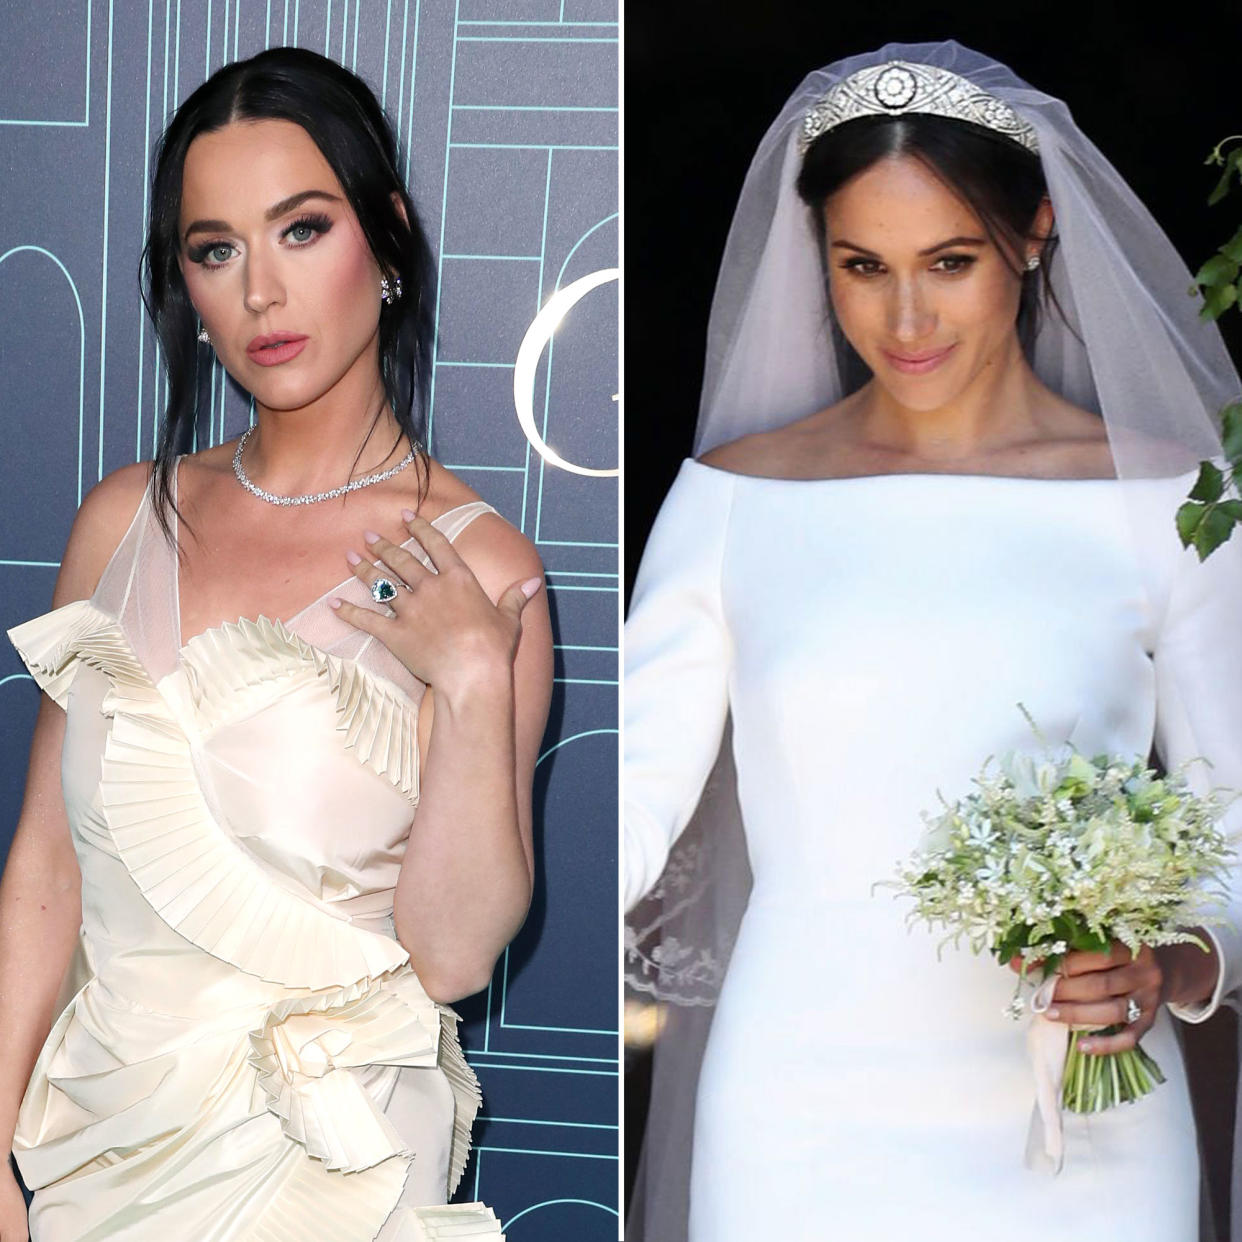 Katy Perry Comments About Meghan Markle Wedding Dress Resurface